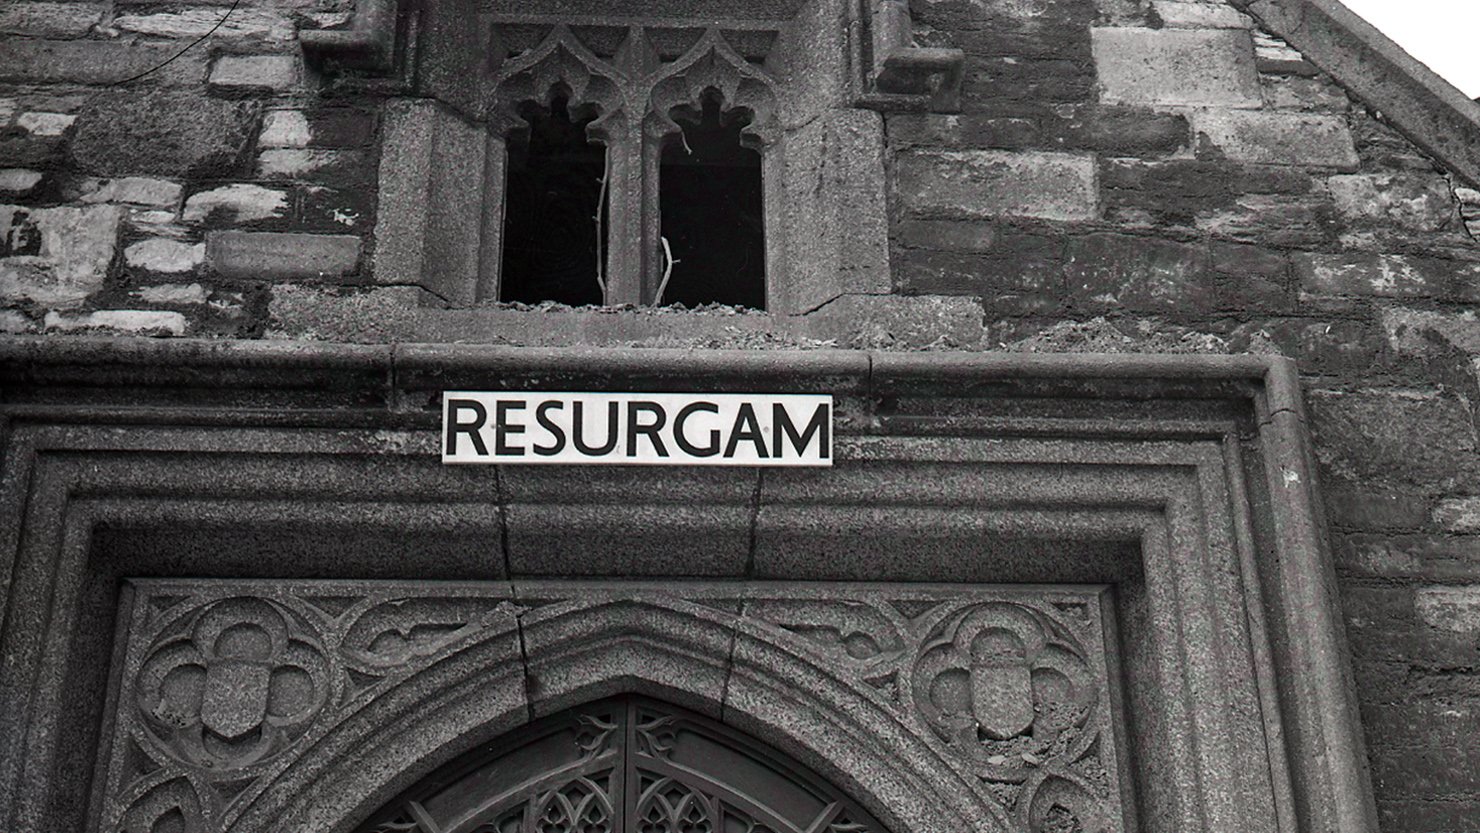 Resurgam sign on St Andrew's Church. Courtesy of The Box, Plymouth